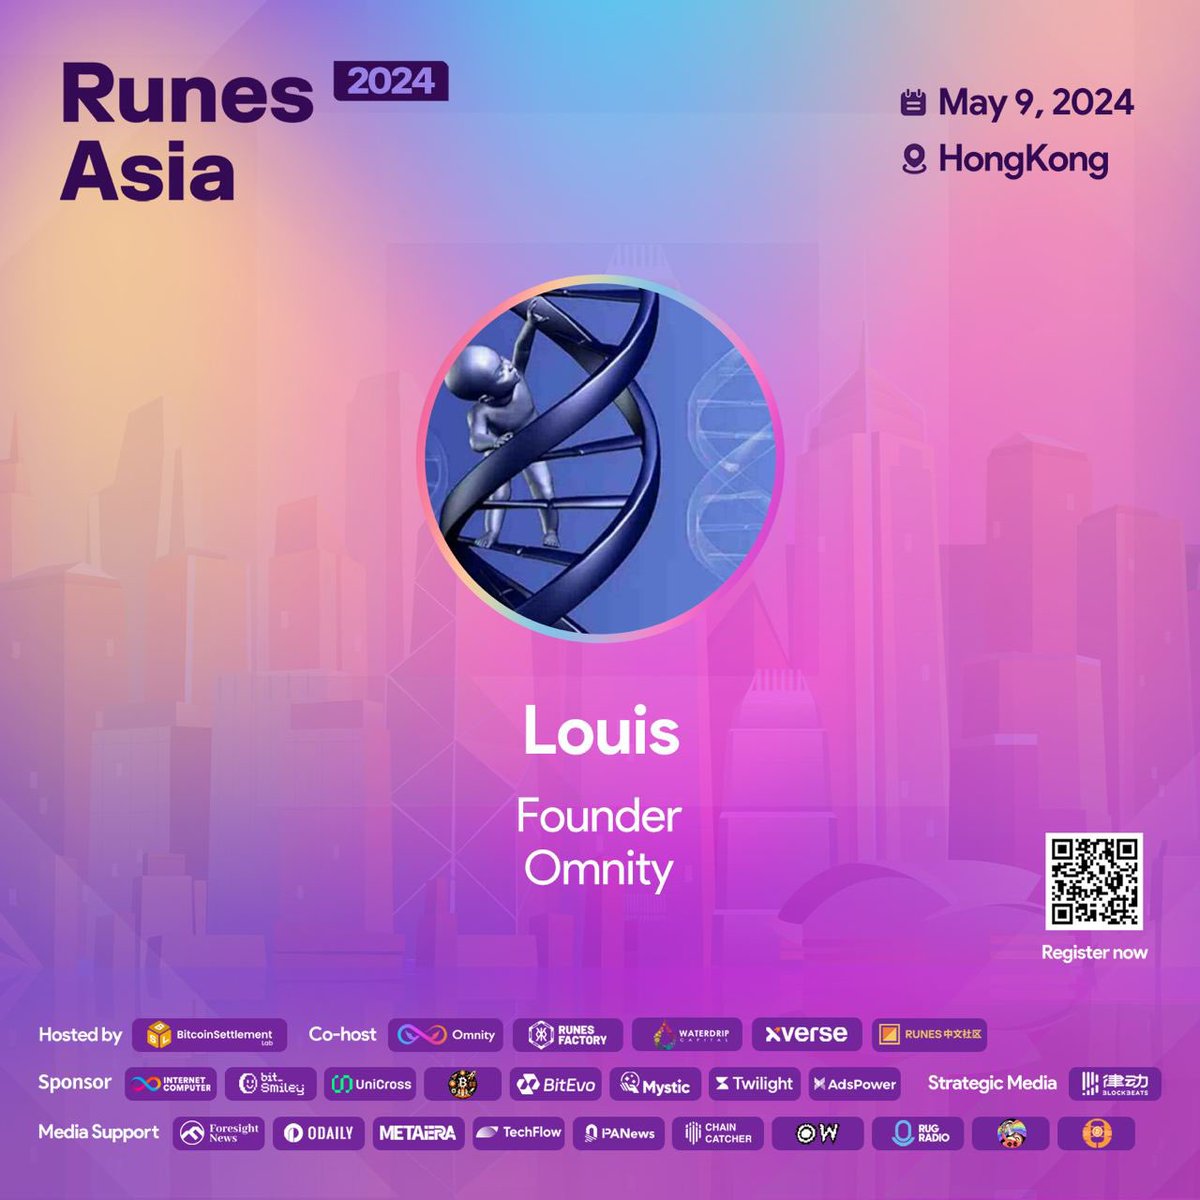 📢📢📢：@louisliubj will be giving his keynote speech titled 'Omnity - The Liquidity and Security Hub of Bitcoin Era' at the #RunesAsia 2024 . This will be the first official @OmnityNetwork reveal in #IRL event. Runes Asia 2024 ⏰ Date: May 9, 2024, all day 🏨 Venue: Kai Tak…